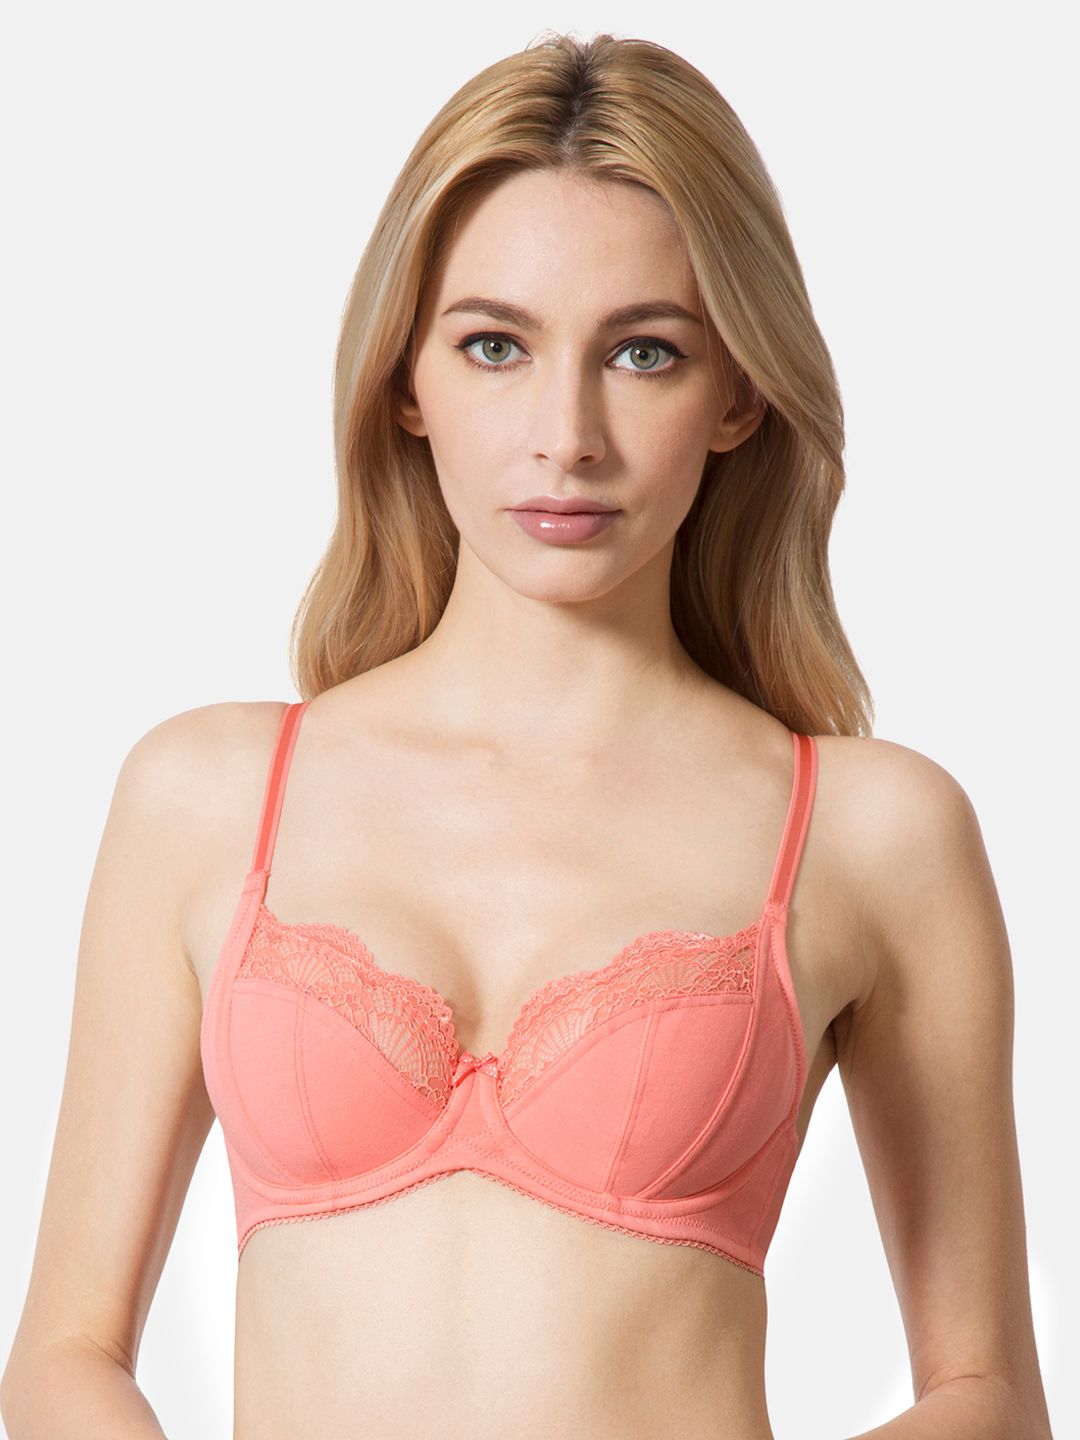 Van Heusen Pink Lace Underwired Non Padded Wired Lace Tipped Balconette Bra ILIBRACSSWW3511009 Price in India